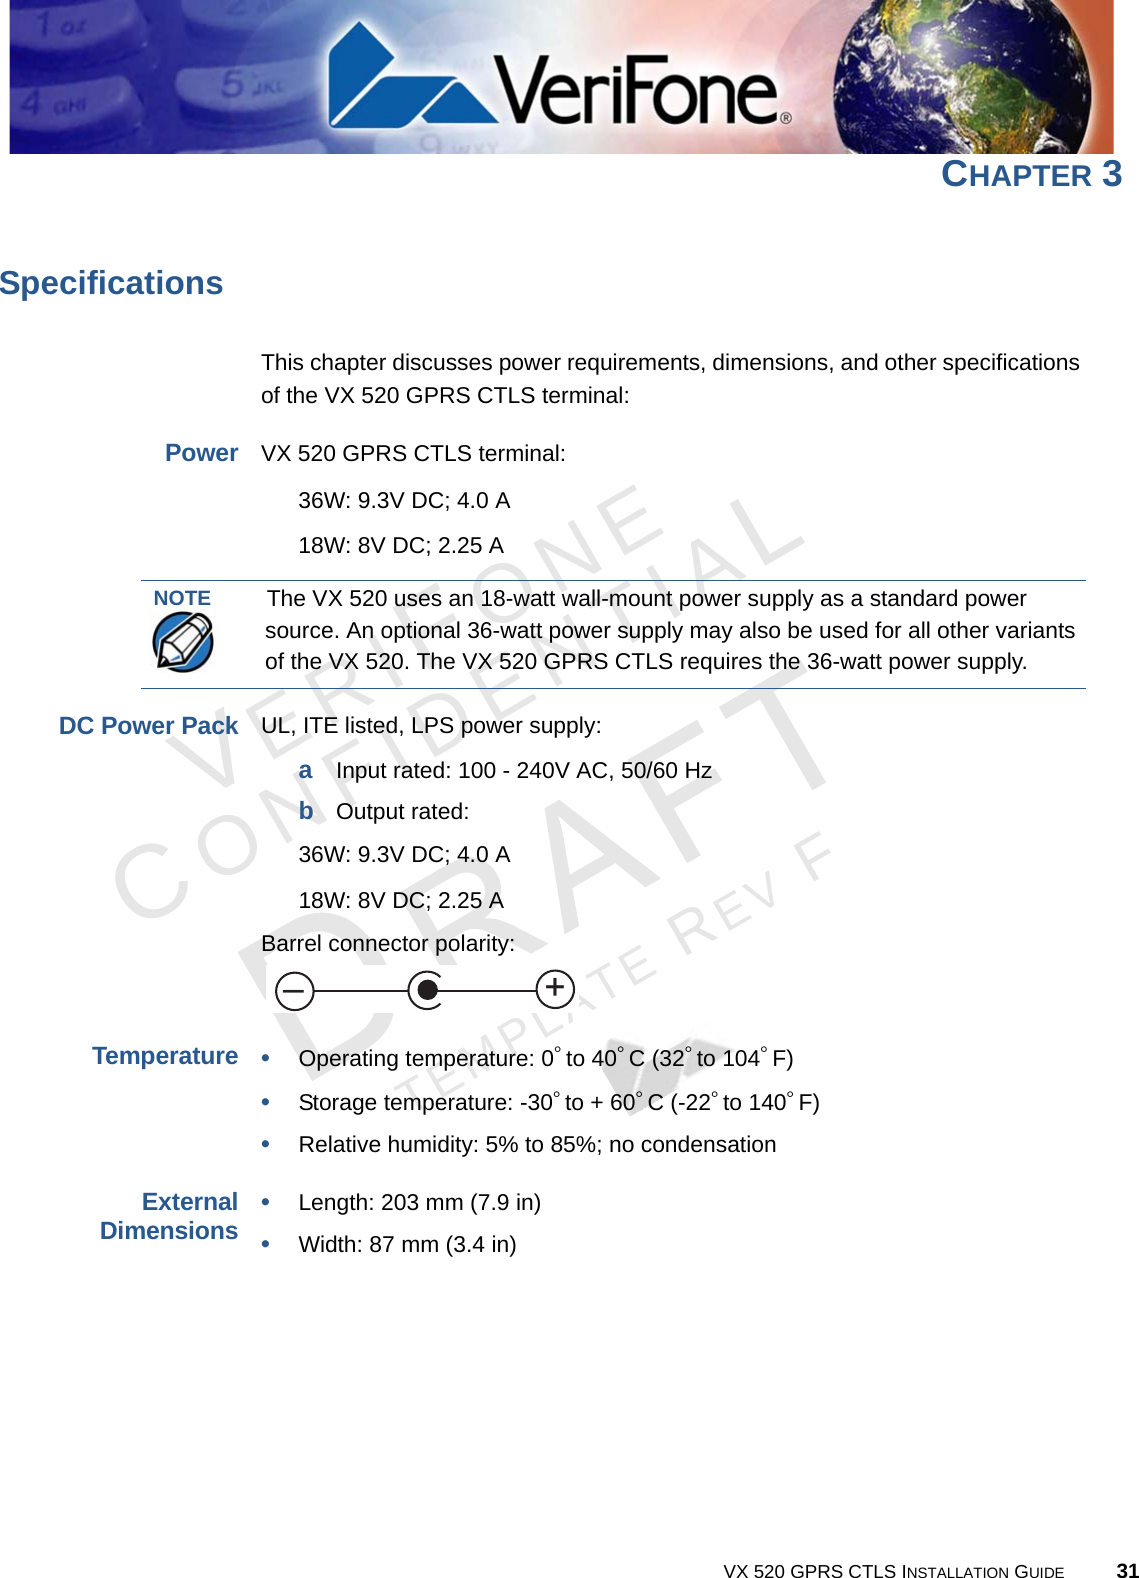 VERIFONECONFIDENTIALTEMPLATE REV F VX 520 GPRS CTLS INSTALLATION GUIDE 31CHAPTER 3SpecificationsThis chapter discusses power requirements, dimensions, and other specifications of the VX 520 GPRS CTLS terminal:PowerVX 520 GPRS CTLS terminal: 36W: 9.3V DC; 4.0 A18W: 8V DC; 2.25 ADC Power PackUL, ITE listed, LPS power supply:aInput rated: 100 - 240V AC, 50/60 HzbOutput rated: 36W: 9.3V DC; 4.0 A18W: 8V DC; 2.25 ABarrel connector polarity: Temperature•Operating temperature: 0° to 40° C (32° to 104° F)•Storage temperature: -30° to + 60° C (-22° to 140° F)•Relative humidity: 5% to 85%; no condensationExternalDimensions•Length: 203 mm (7.9 in)•Width: 87 mm (3.4 in)NOTEThe VX 520 uses an 18-watt wall-mount power supply as a standard power source. An optional 36-watt power supply may also be used for all other variants of the VX 520. The VX 520 GPRS CTLS requires the 36-watt power supply.+–